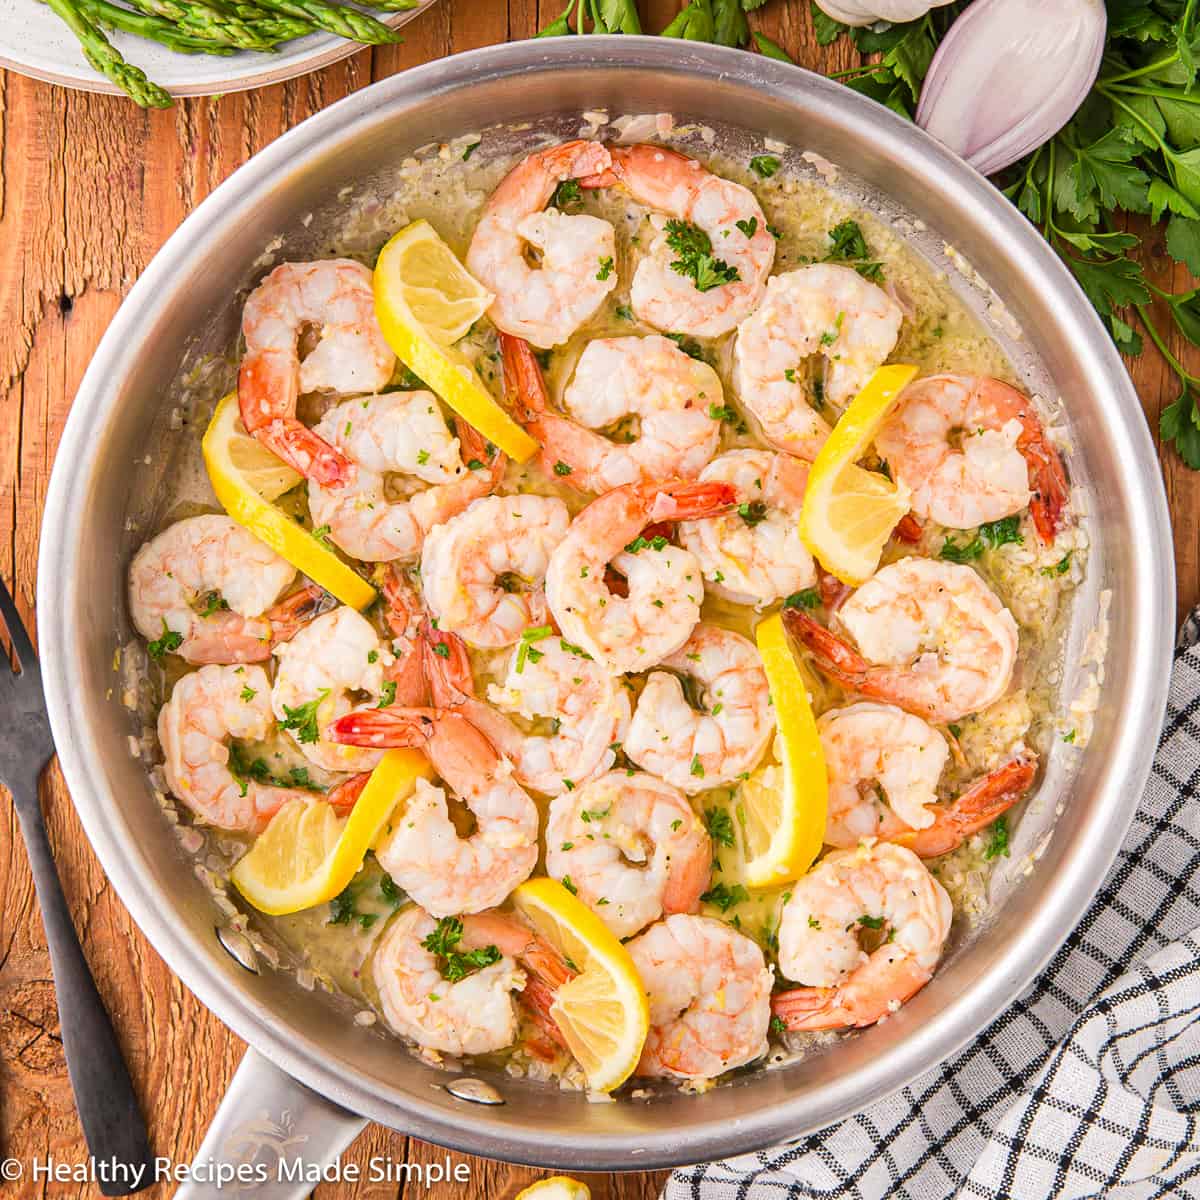 A skillet filled with cooked shrimp in garlic butter sauce.